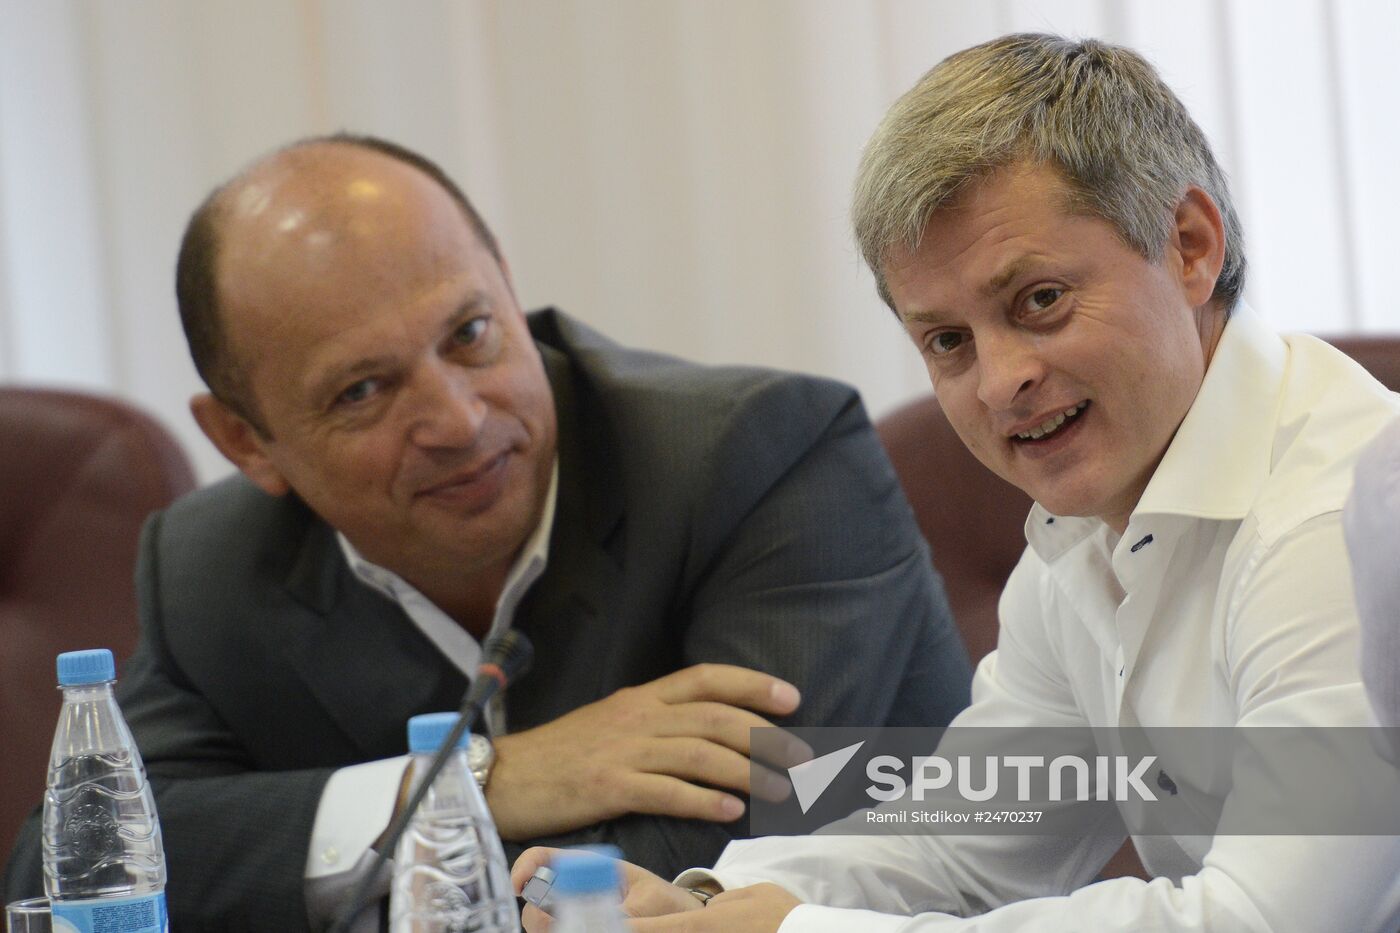 Russian Football Union Executive Committee meeting